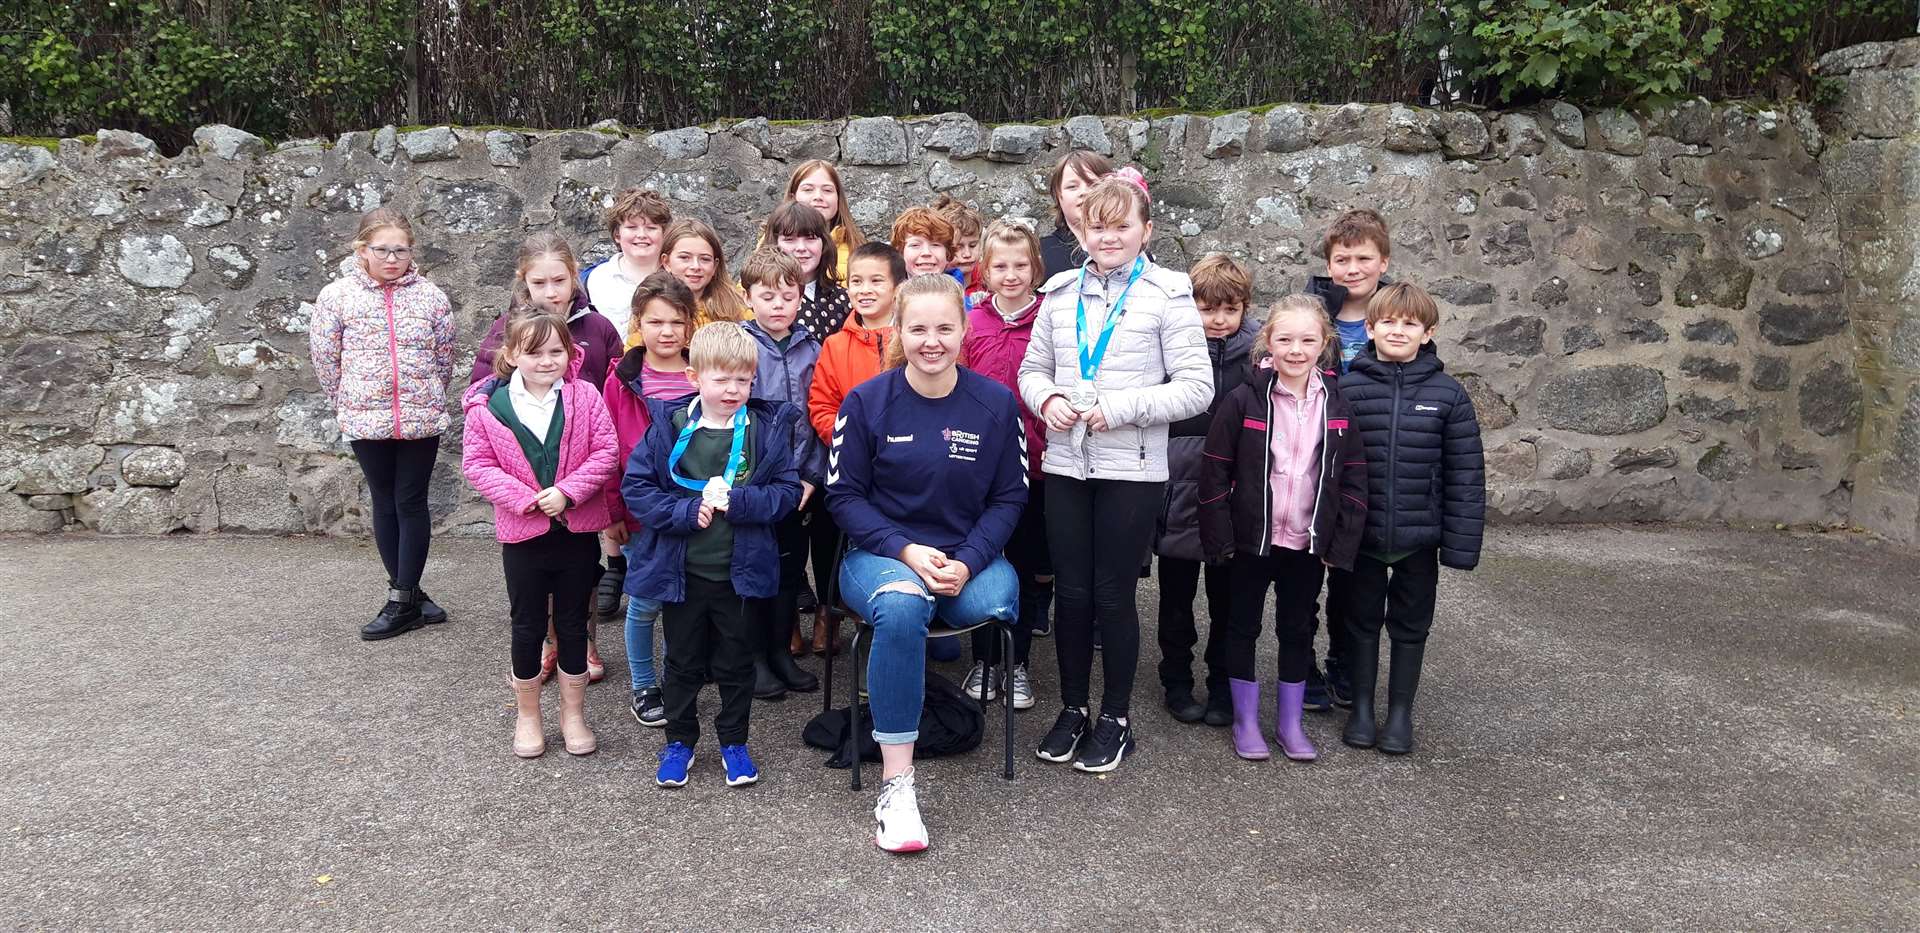 Hope Gordon told Rogart Primary School pupils how she had battled adversity to become one of the UK’s top para-canoeists and said that for them too, anything was possible.